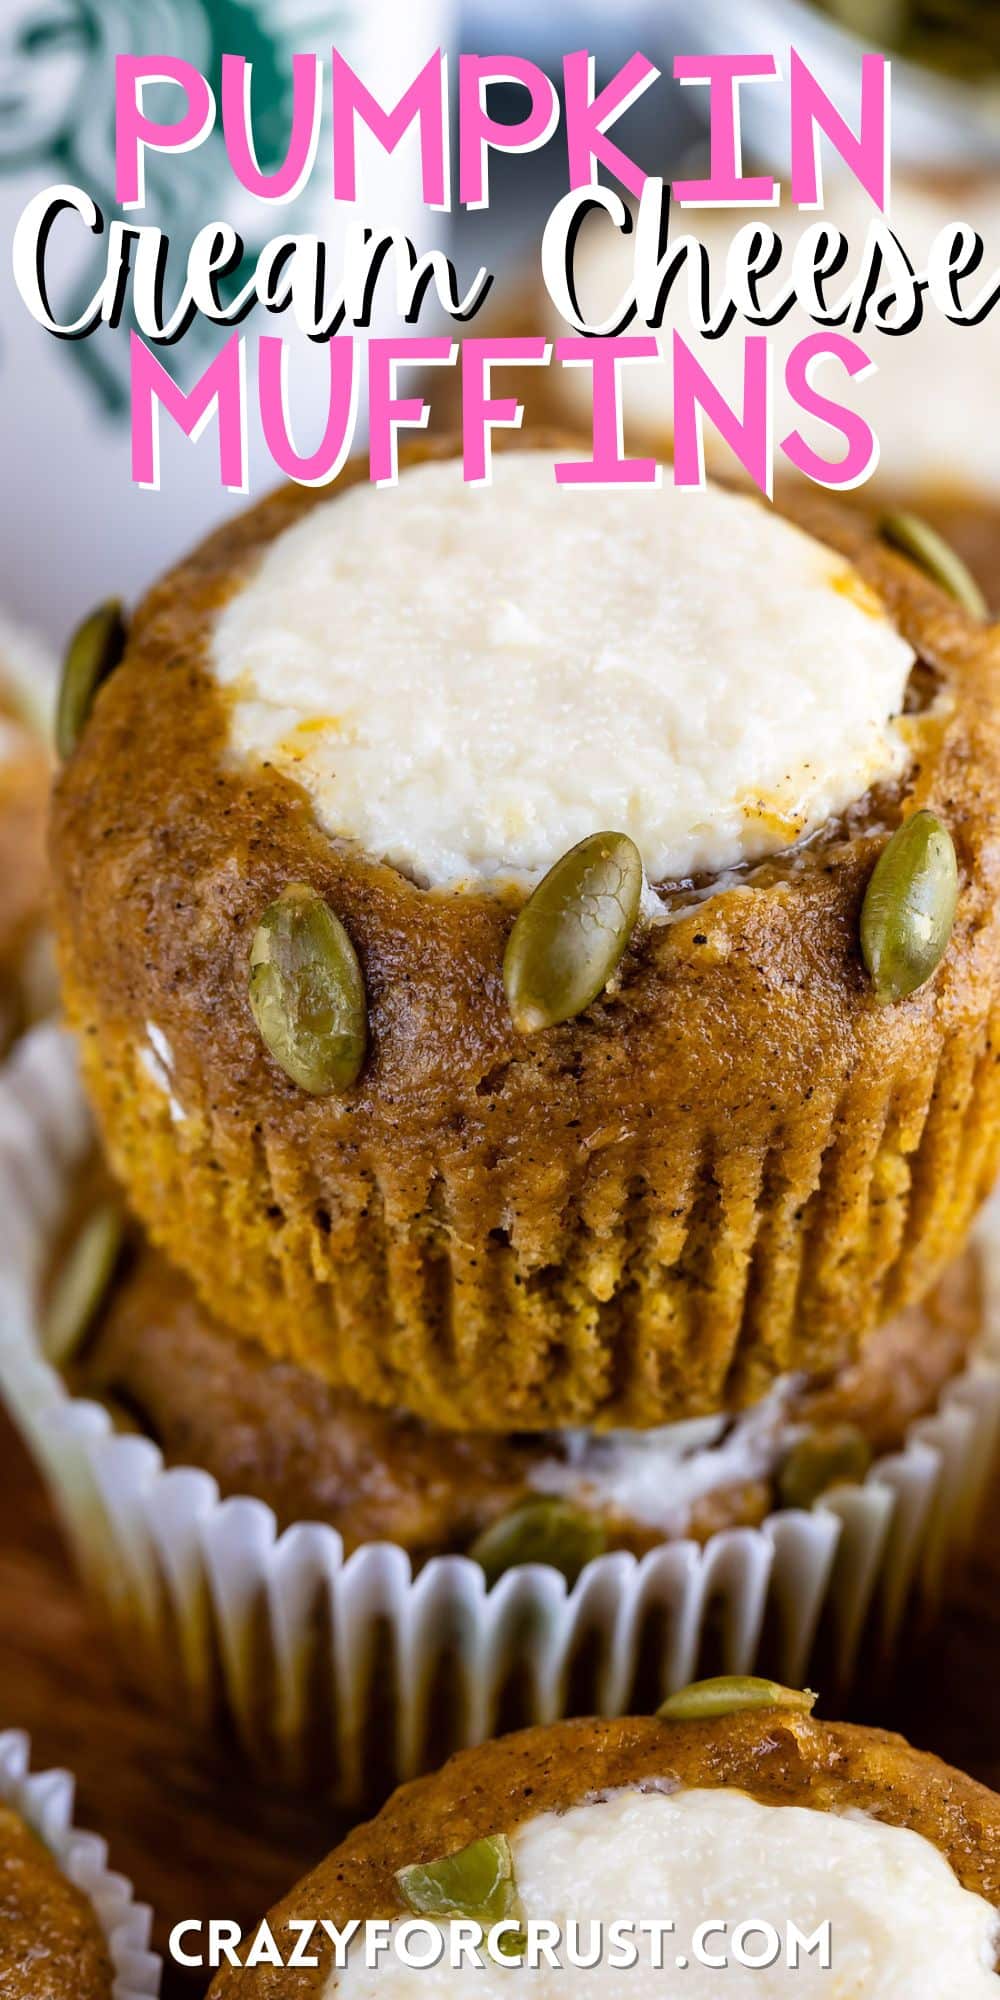 muffins with seeds and cream cheese in the center and words on the image.